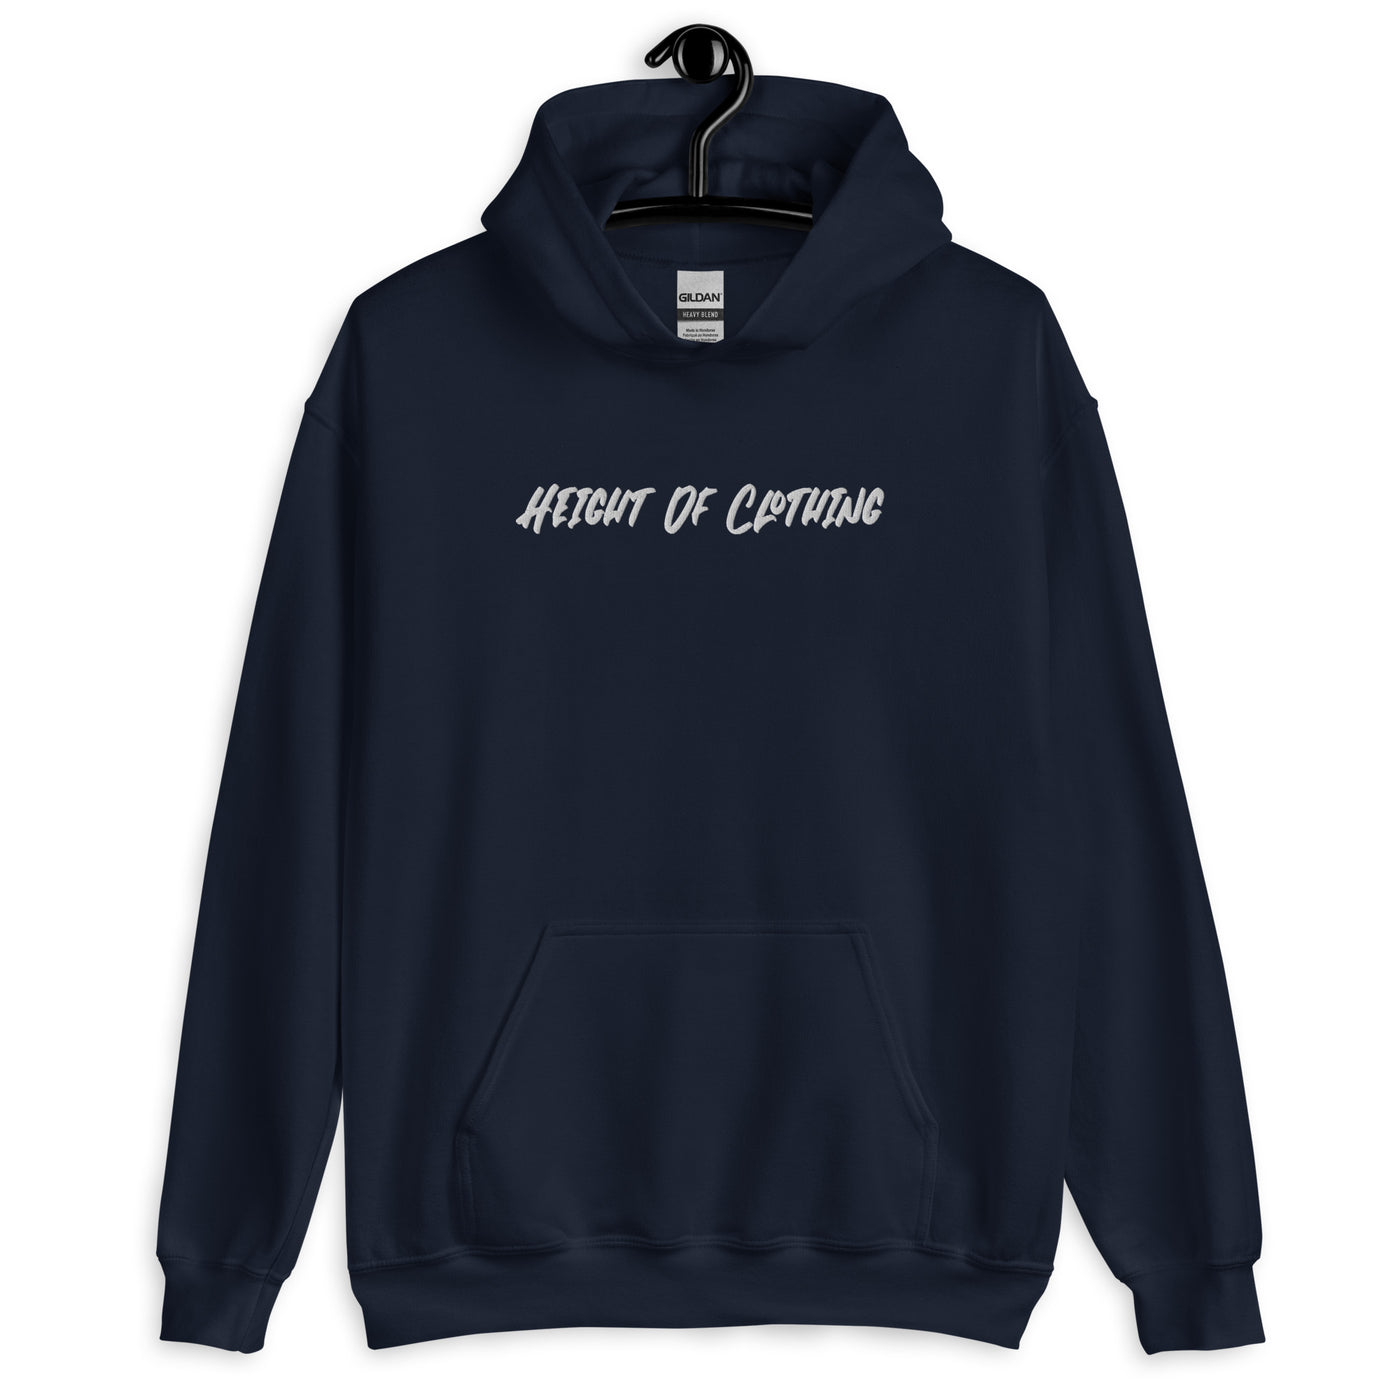 LIFESTYLE HOODIE HEIGHT OF CLOTHING